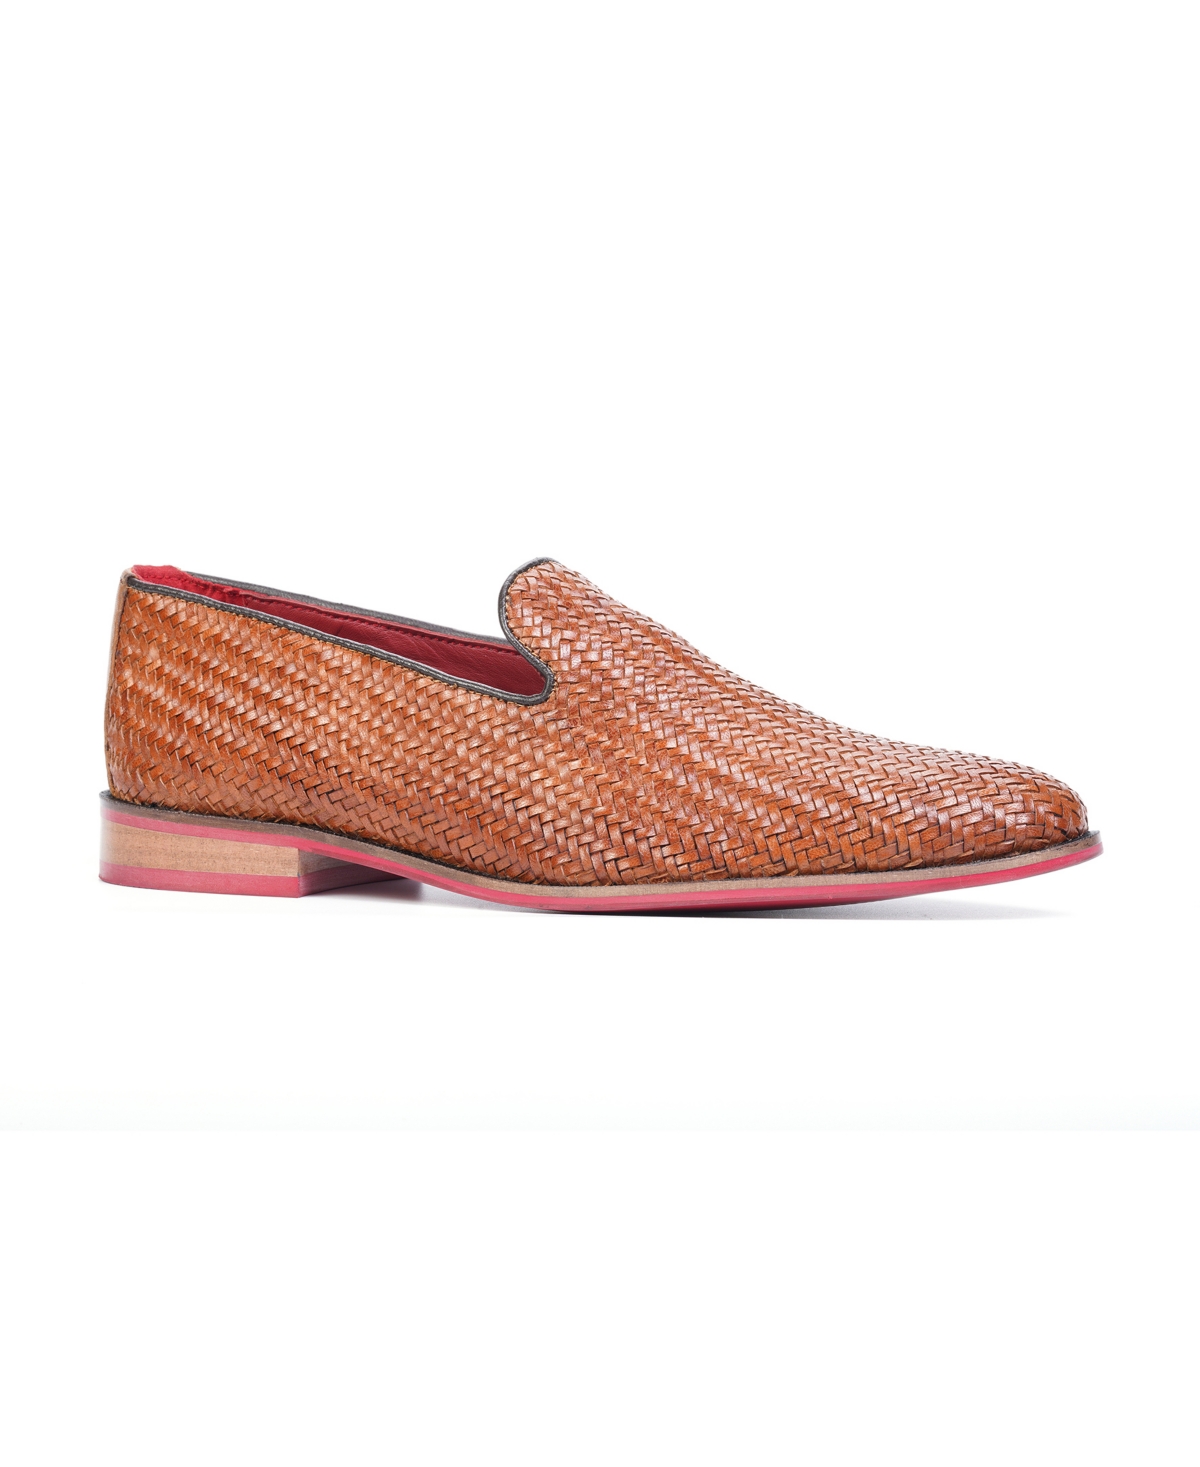 Men's Gibson Weave Loafers - Tan